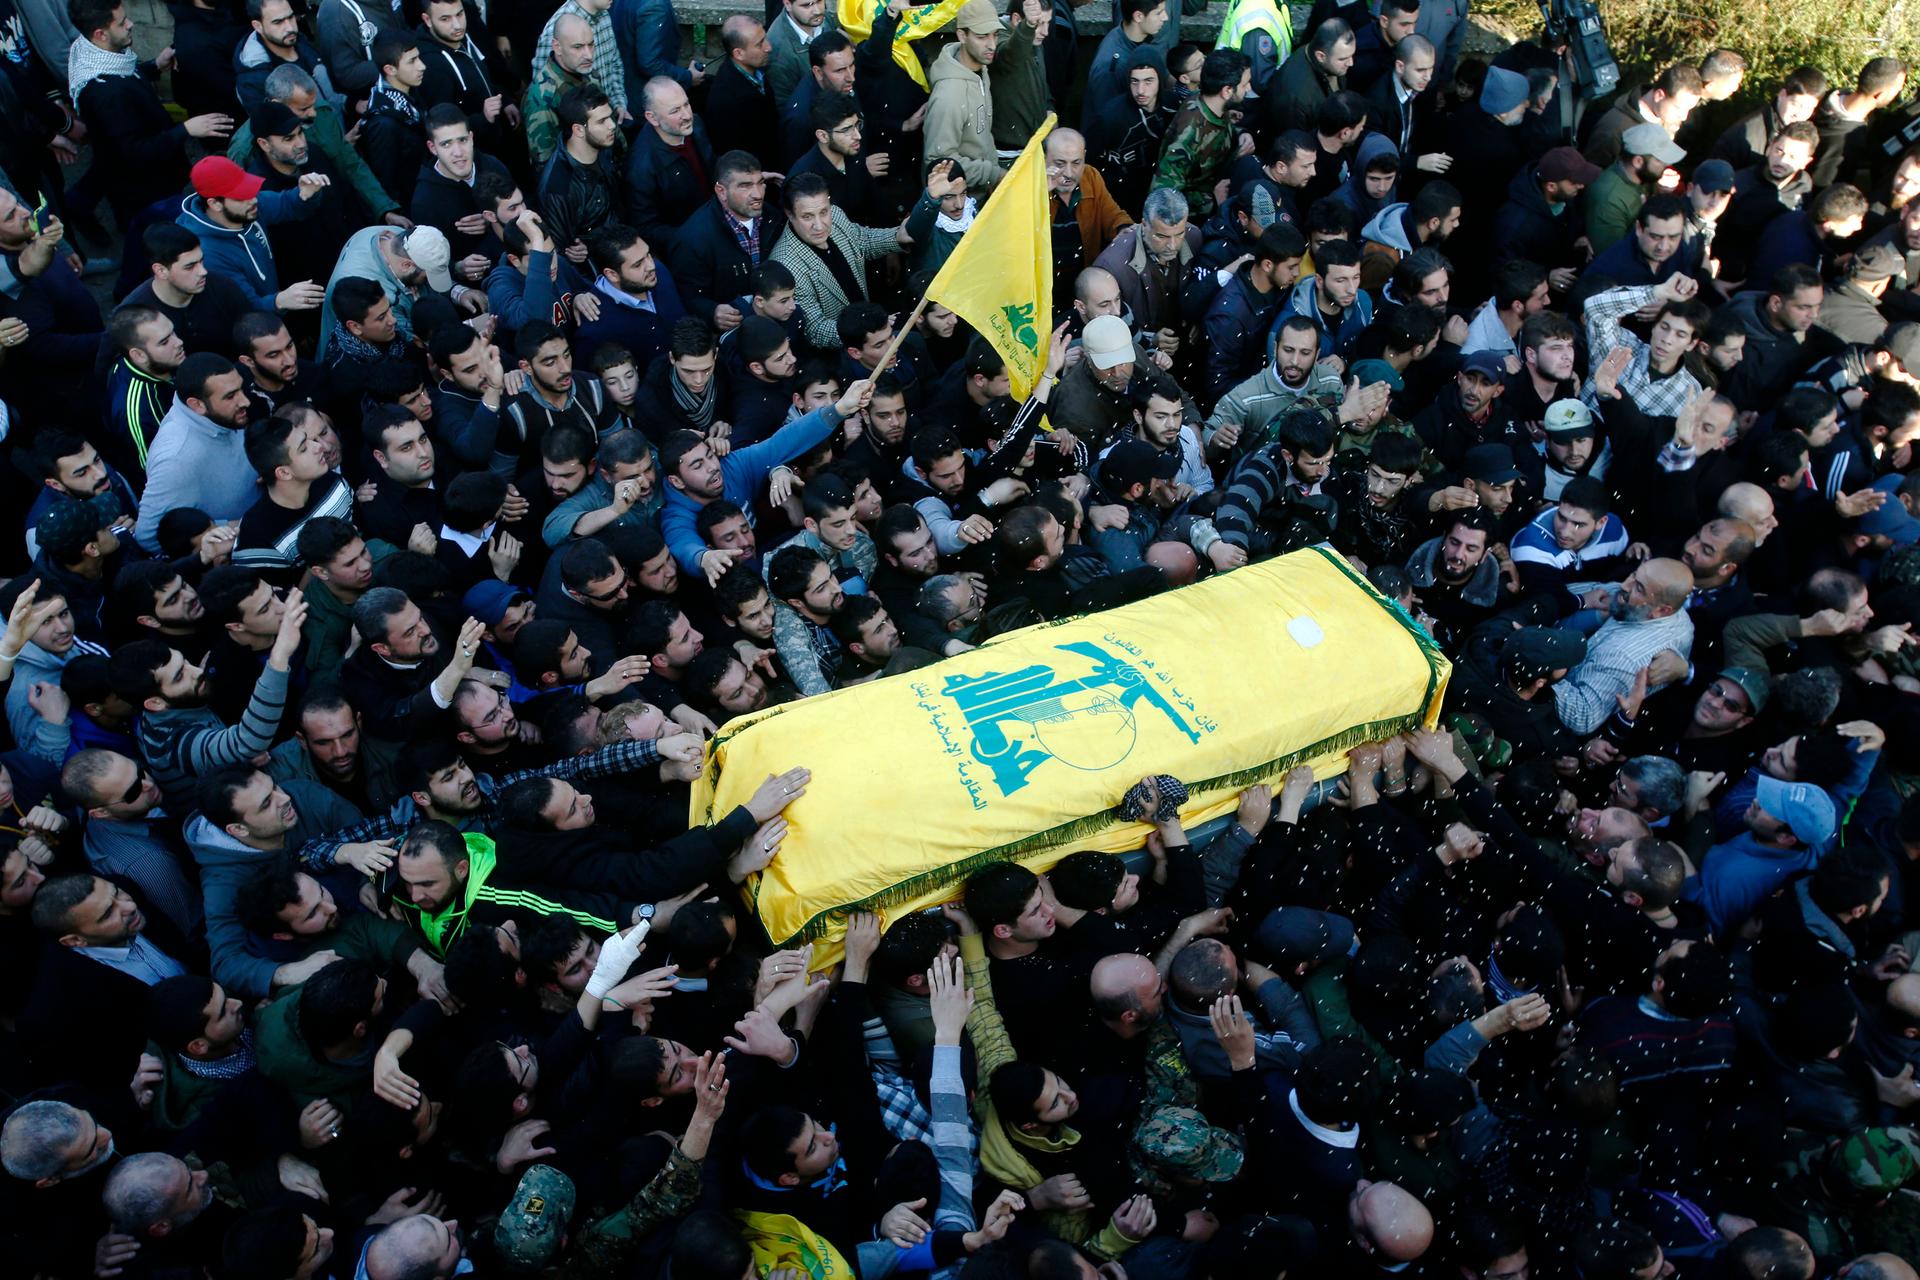 Members and supporters of Lebanon's Hezbollah commander Mohamad Issa, known as Abu Issa, carry his coffin during his funeral in Arab-Salim in south Lebanon on January 20, 2015. He was killed in an alleged Israeli airstrike in Syria on January 18.